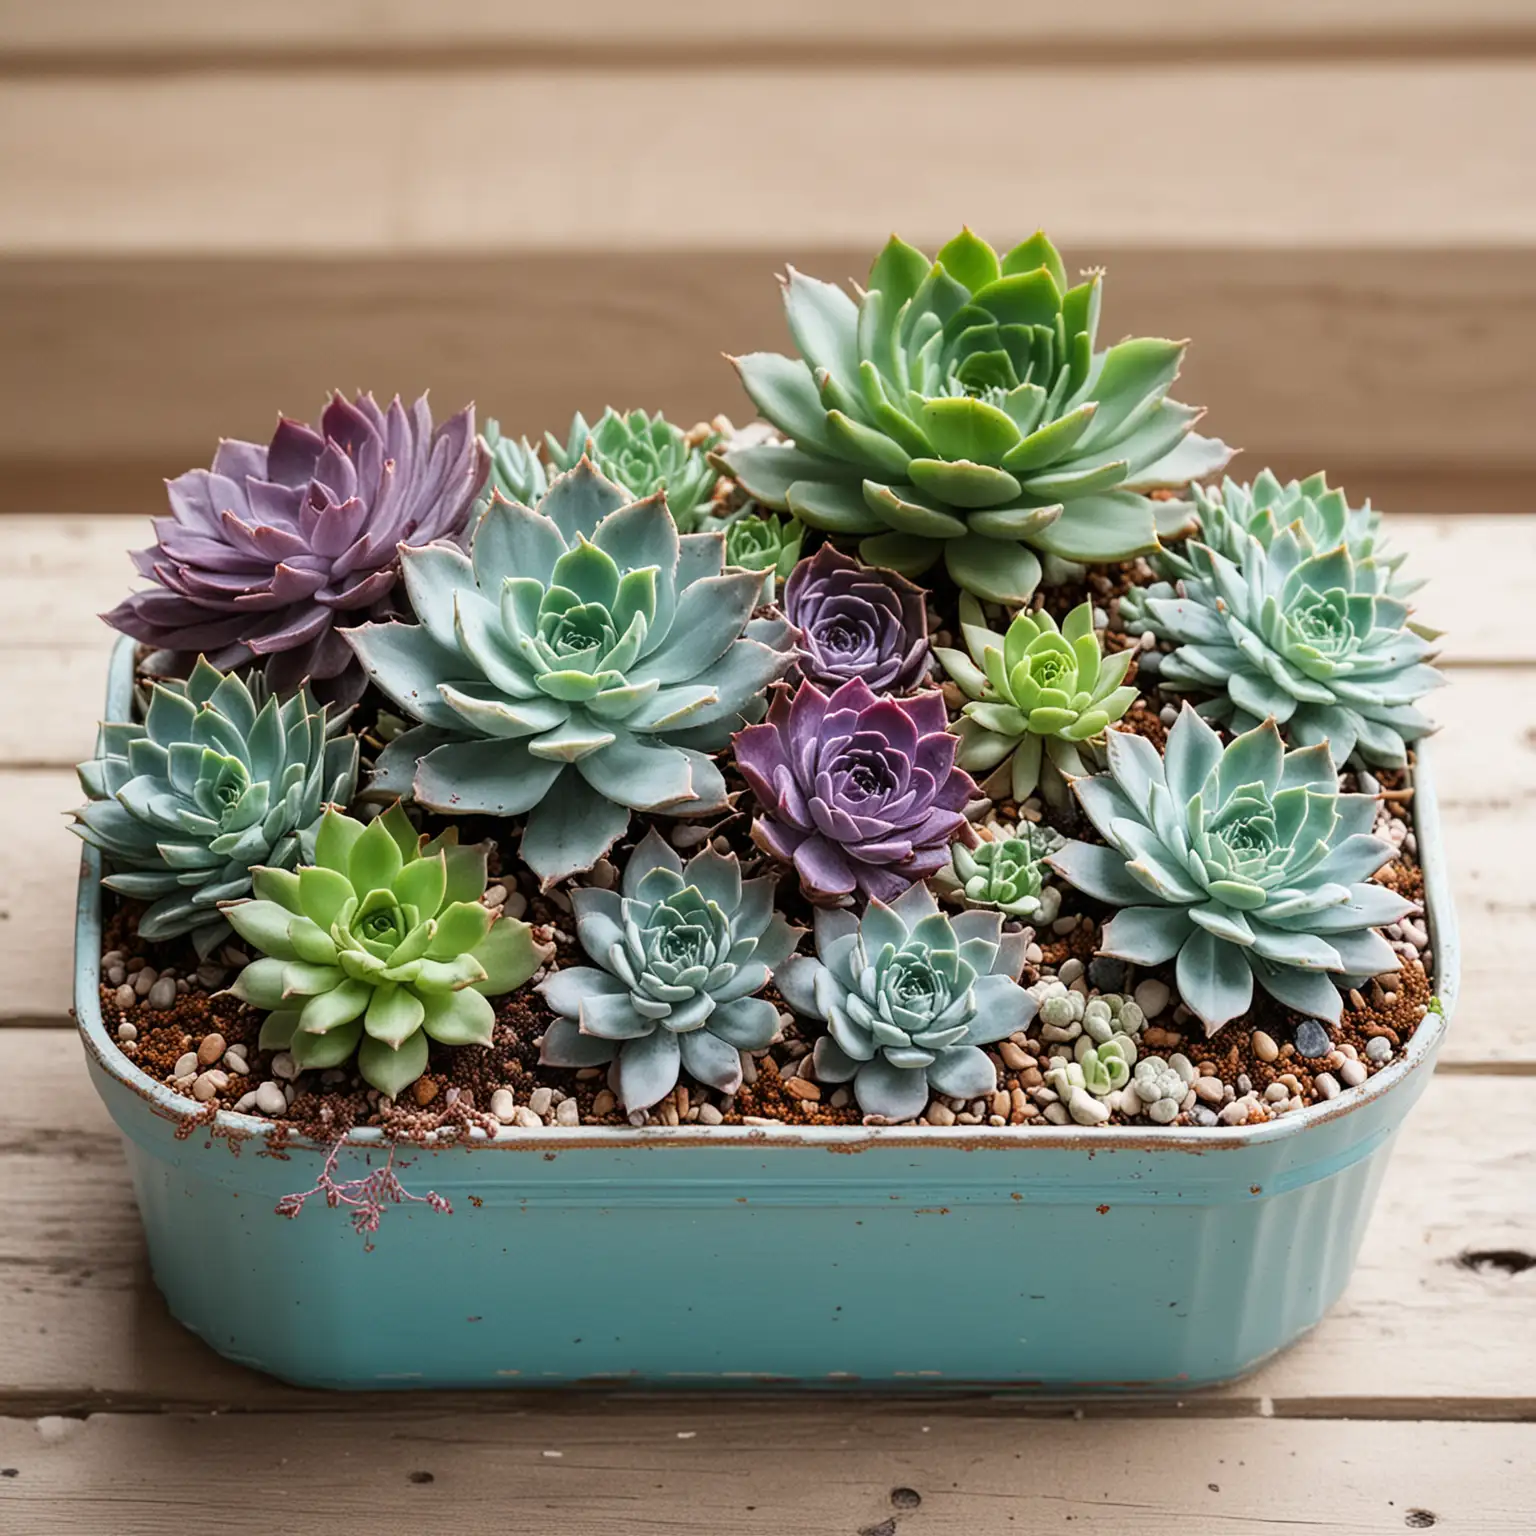 Boho-Chic-Wedding-Centerpiece-Succulents-in-Turquoise-and-Purple-Containers